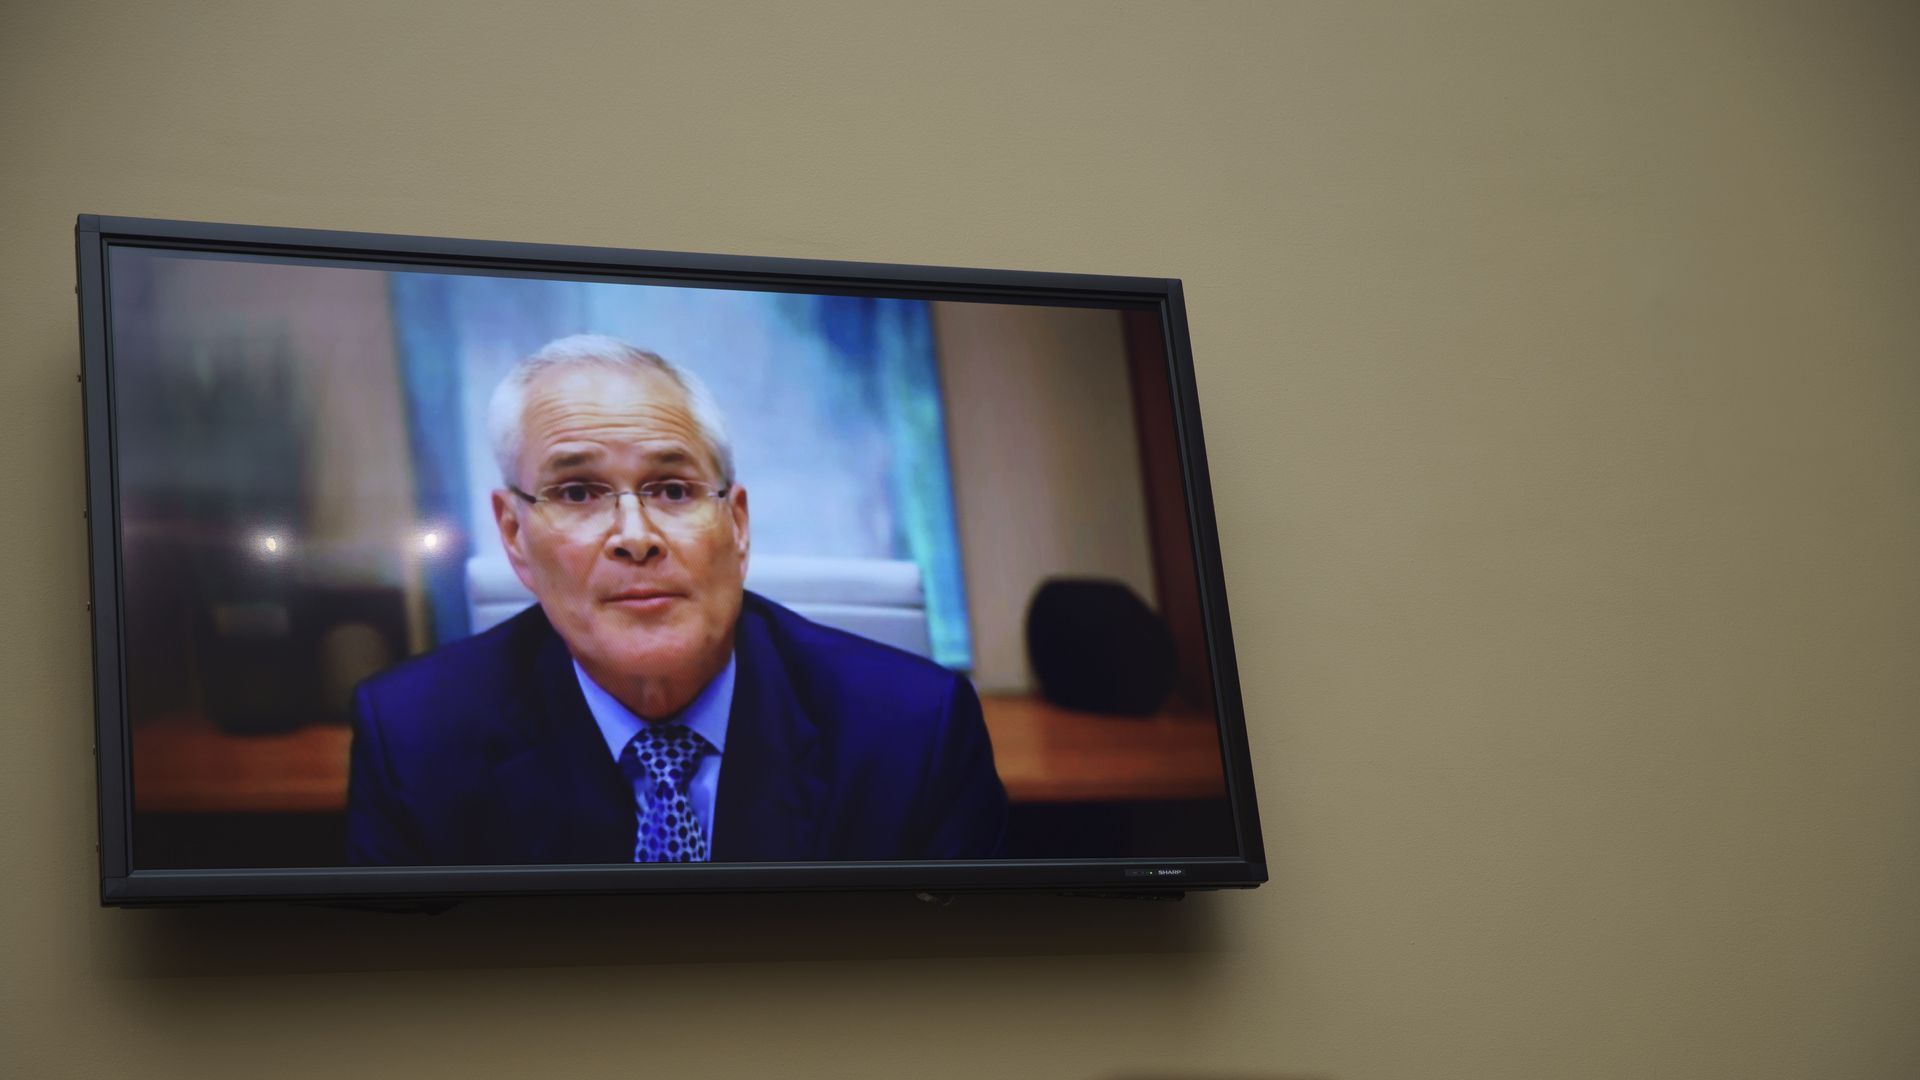 Darren Woods, chairman and CEO of ExxonMobil, speaks via videoconference during a House committee hearing on Oct. 28, 2021.